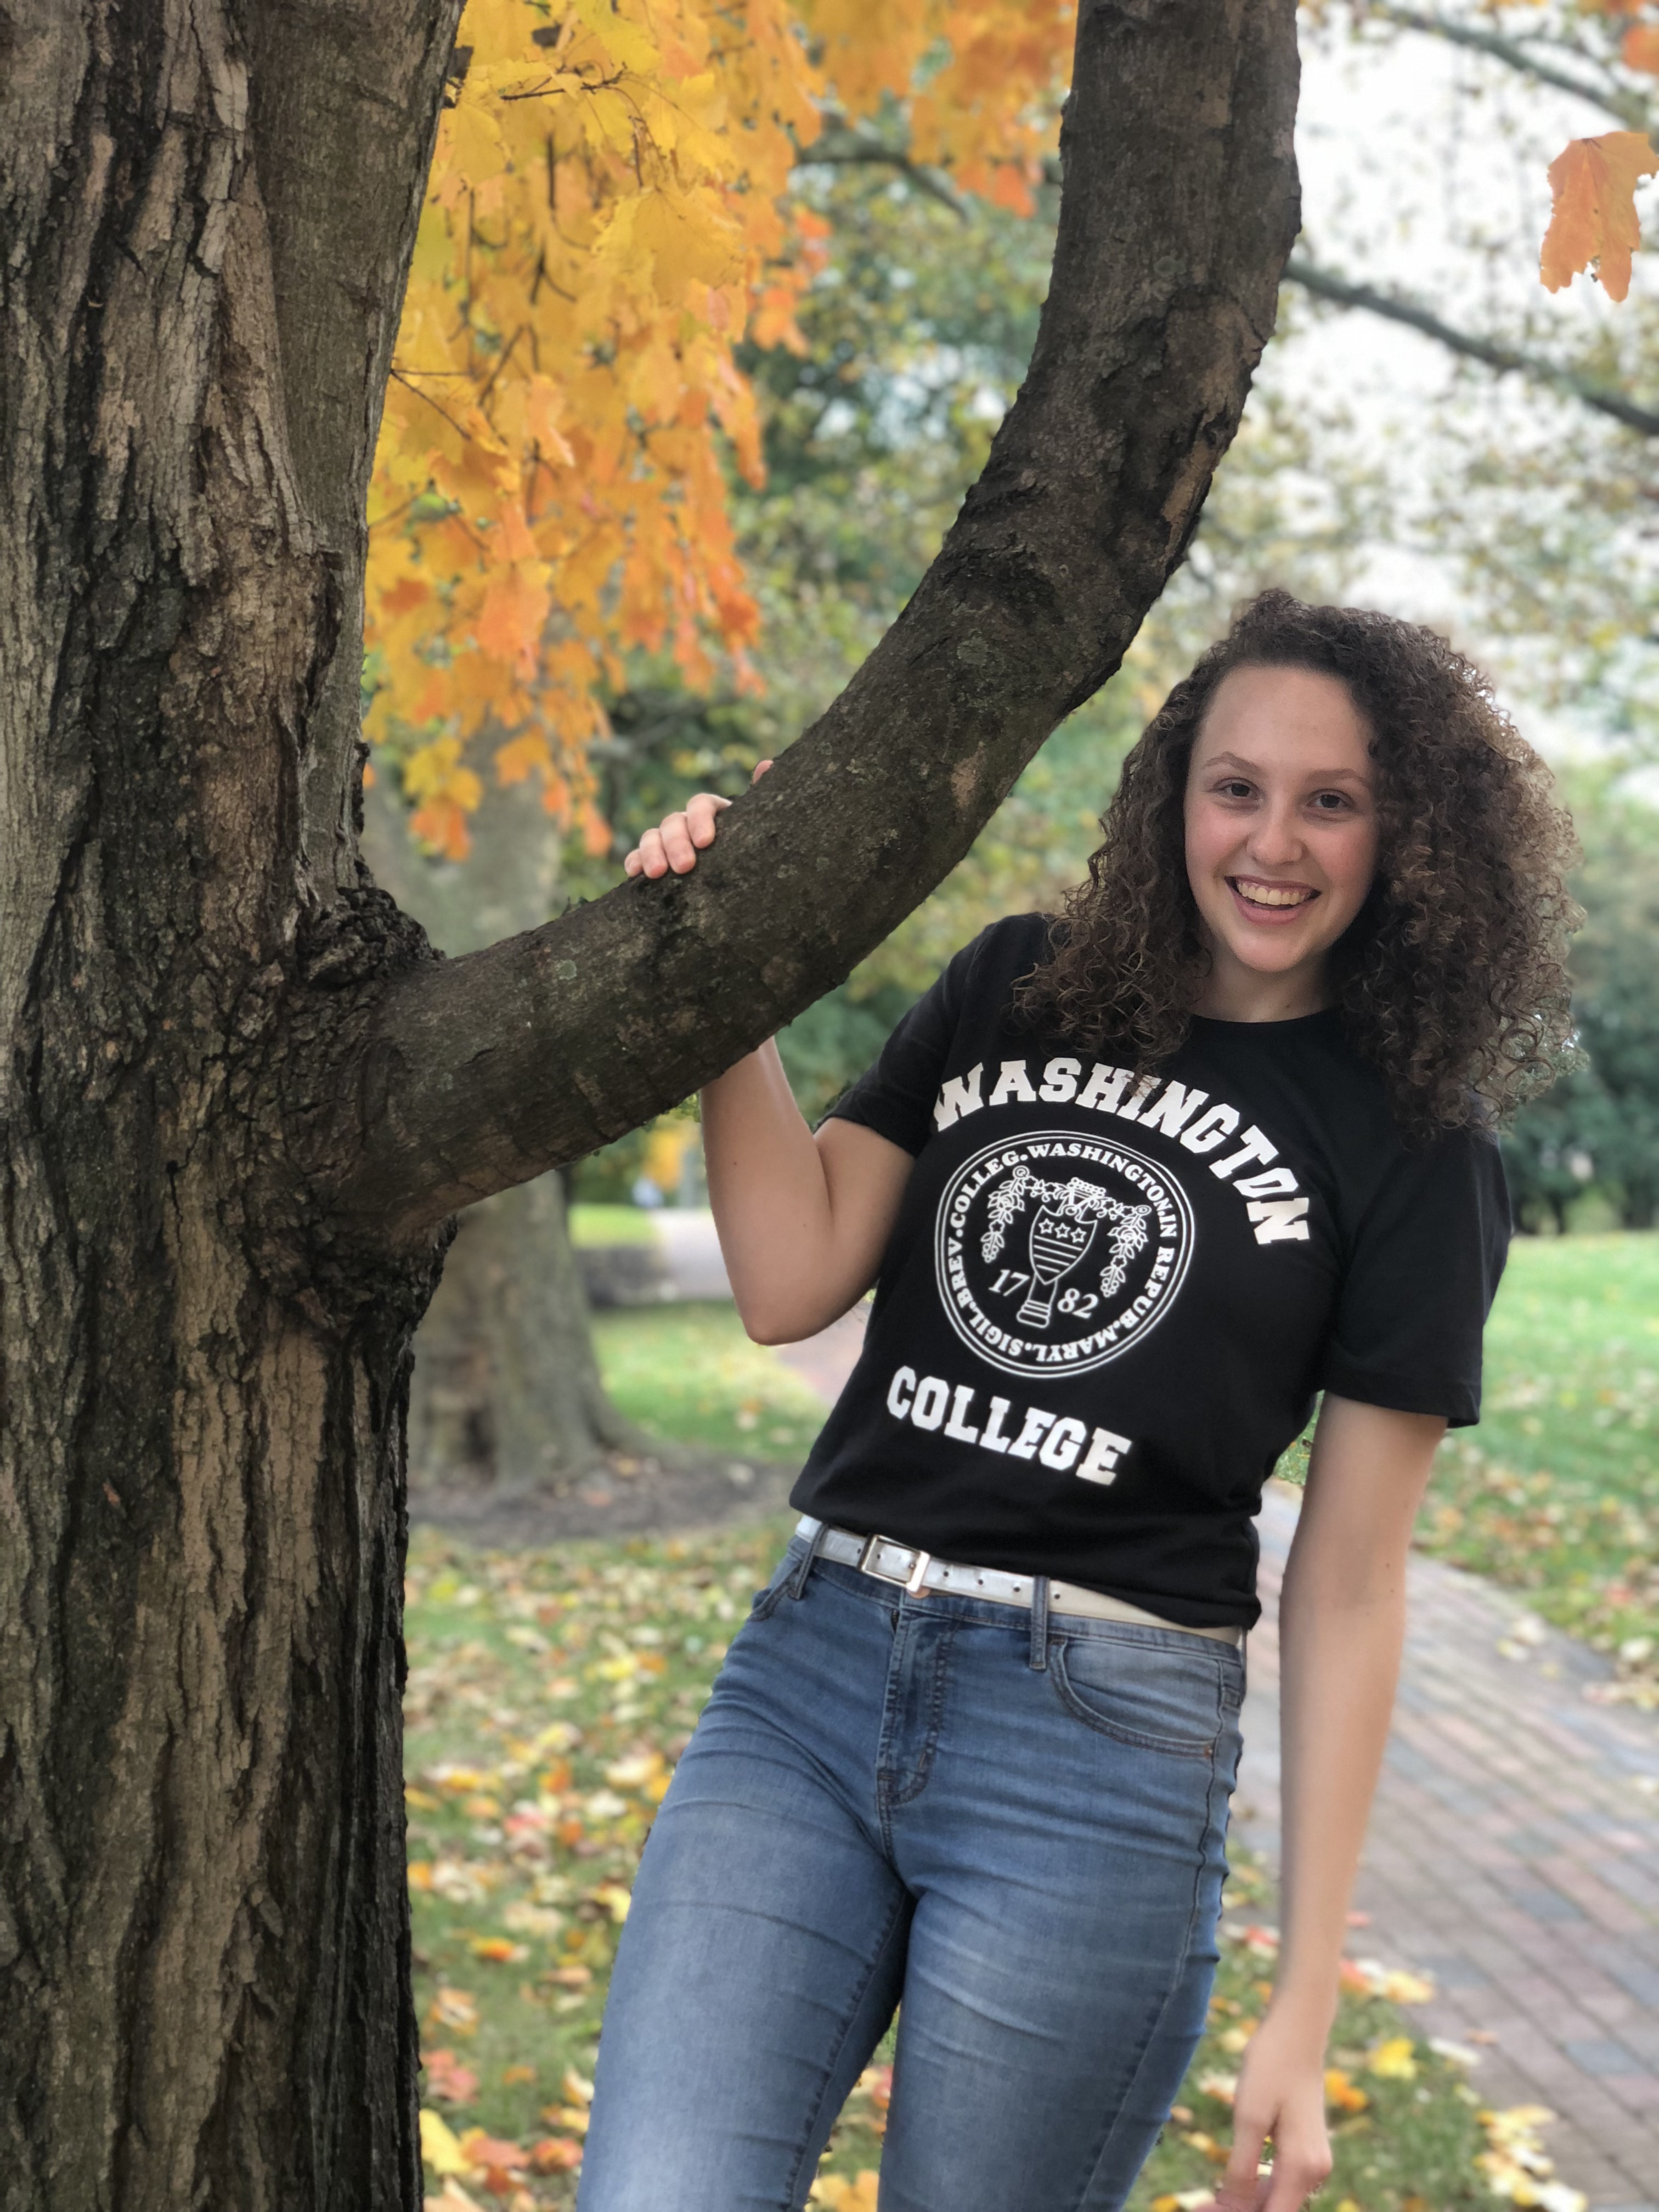 Carlee, smiling and wearing a black t-shirt with the Washington College logo, blue jeans, and a white belt in front of fall foliage. 